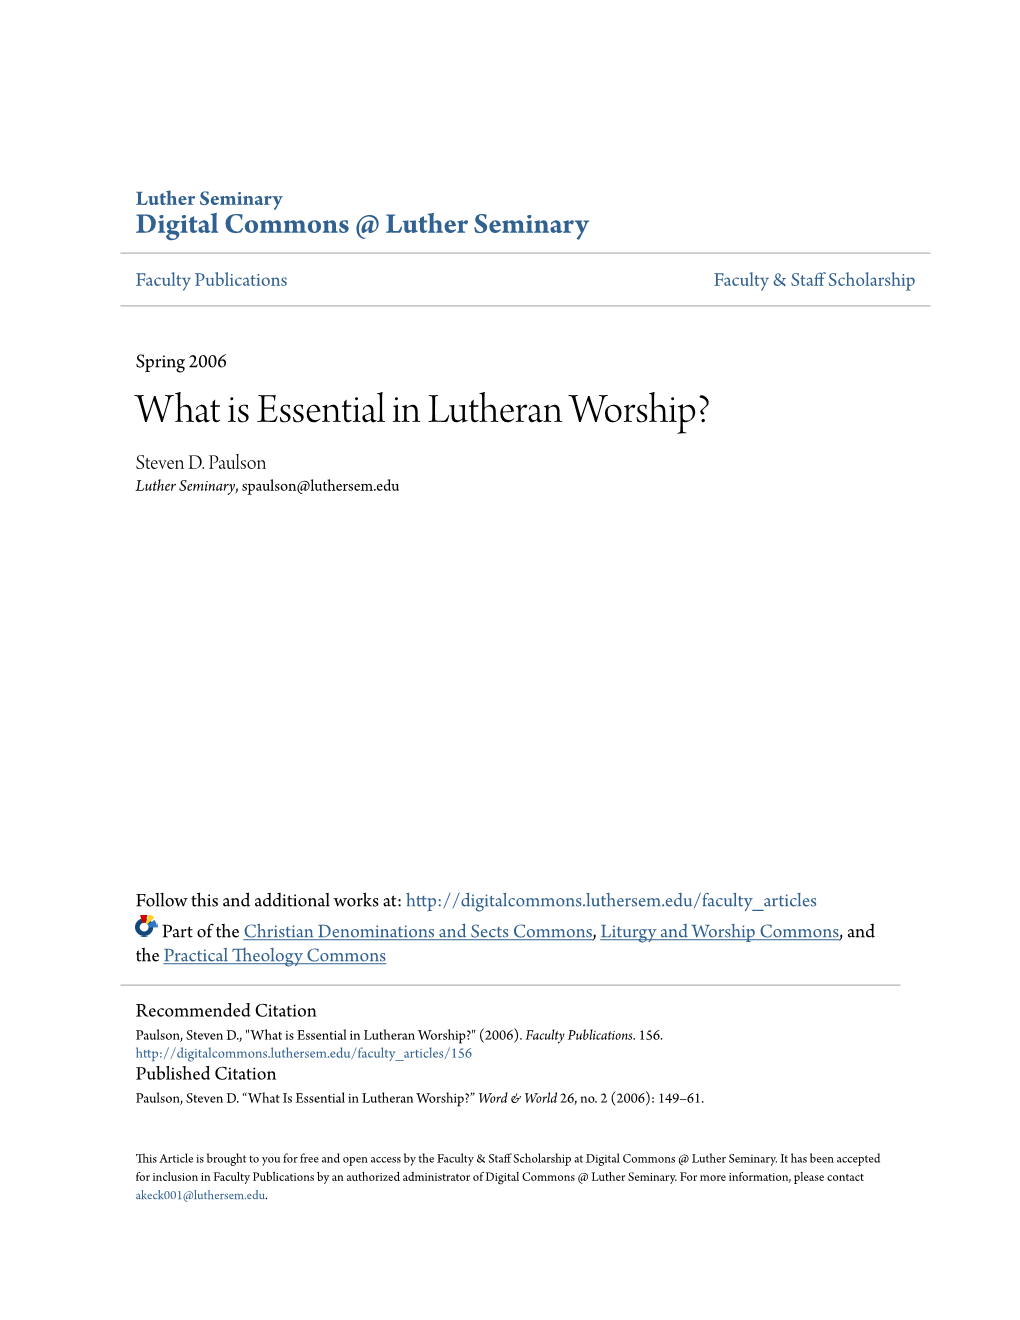 What Is Essential in Lutheran Worship? Steven D